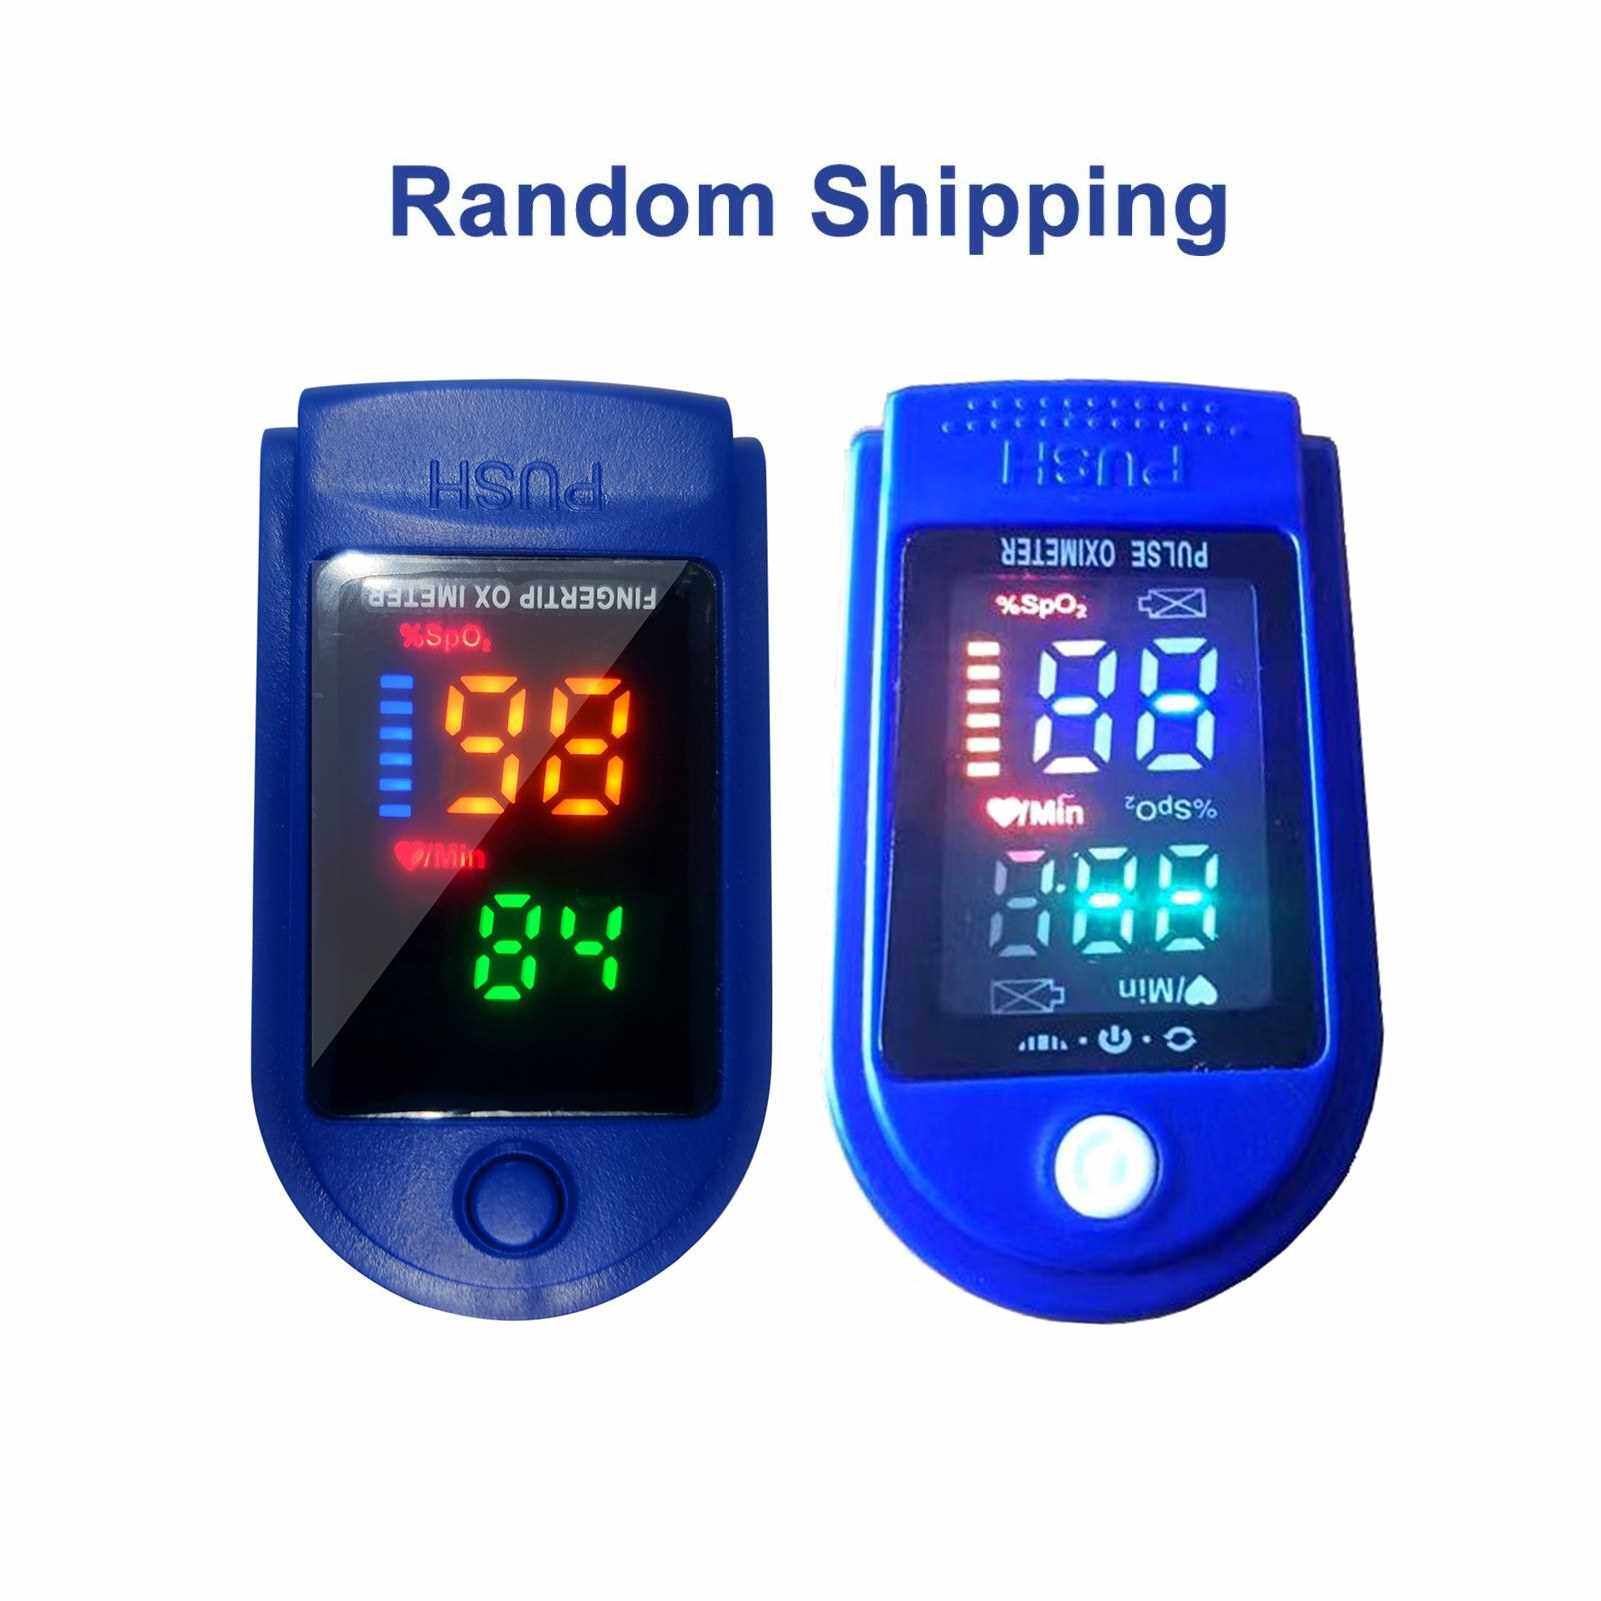 Best Selling Fingertip Pulse Oximeter Blood Oxygen Saturation & Heart Rate Detection 10s Quick Measure & Auto-off Alarm Function Portable SpO2 & Min Monitor for Home Travel (Standard)